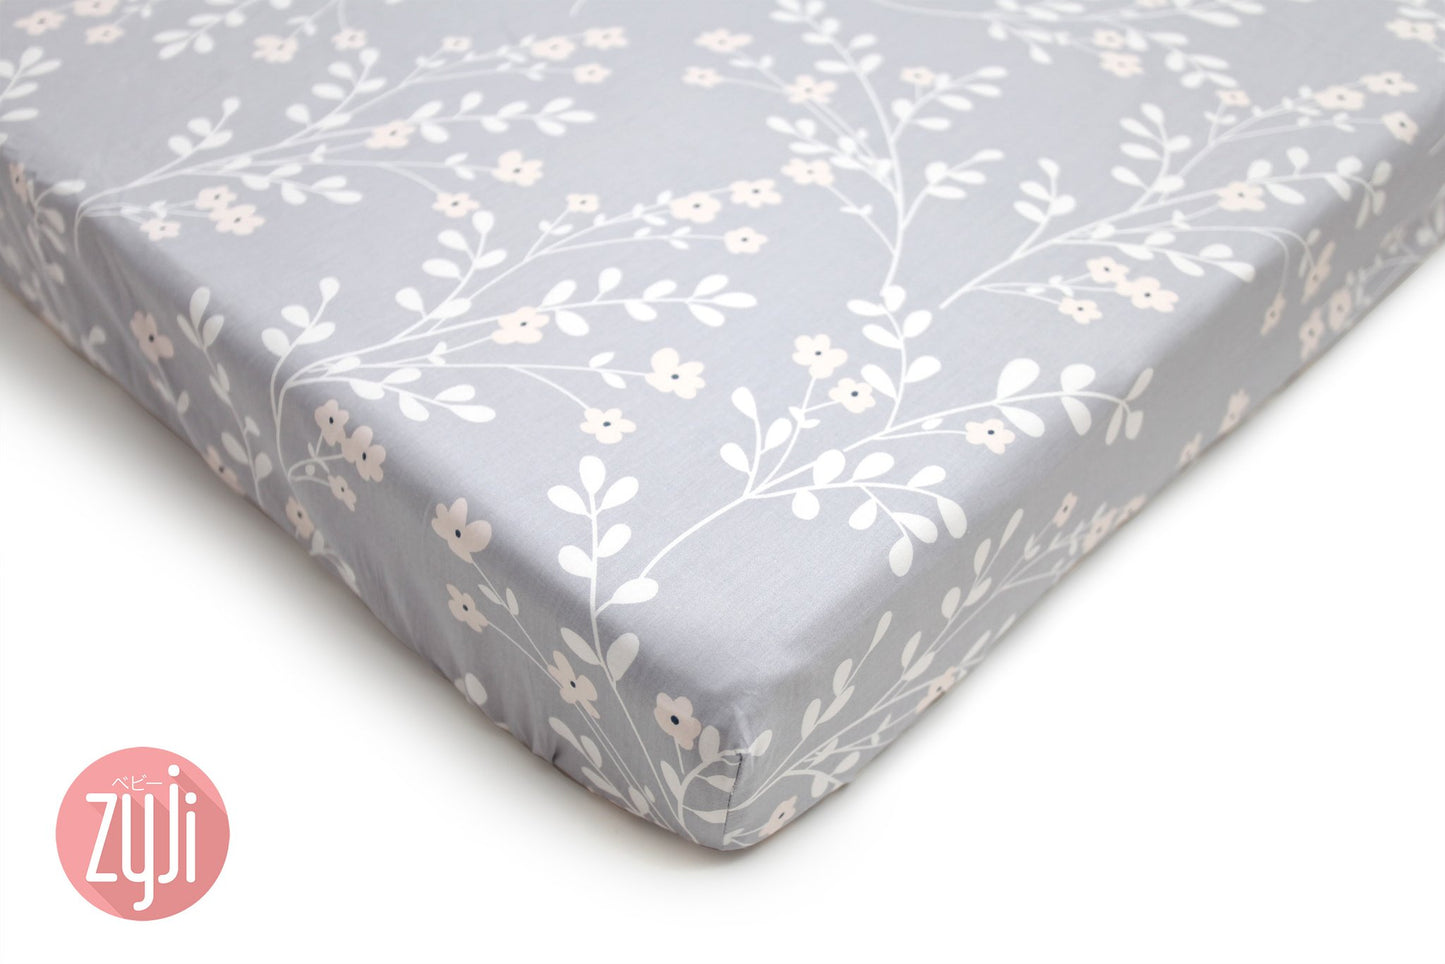 Crib Fitted Sheet (28X52) - Blossom Gray